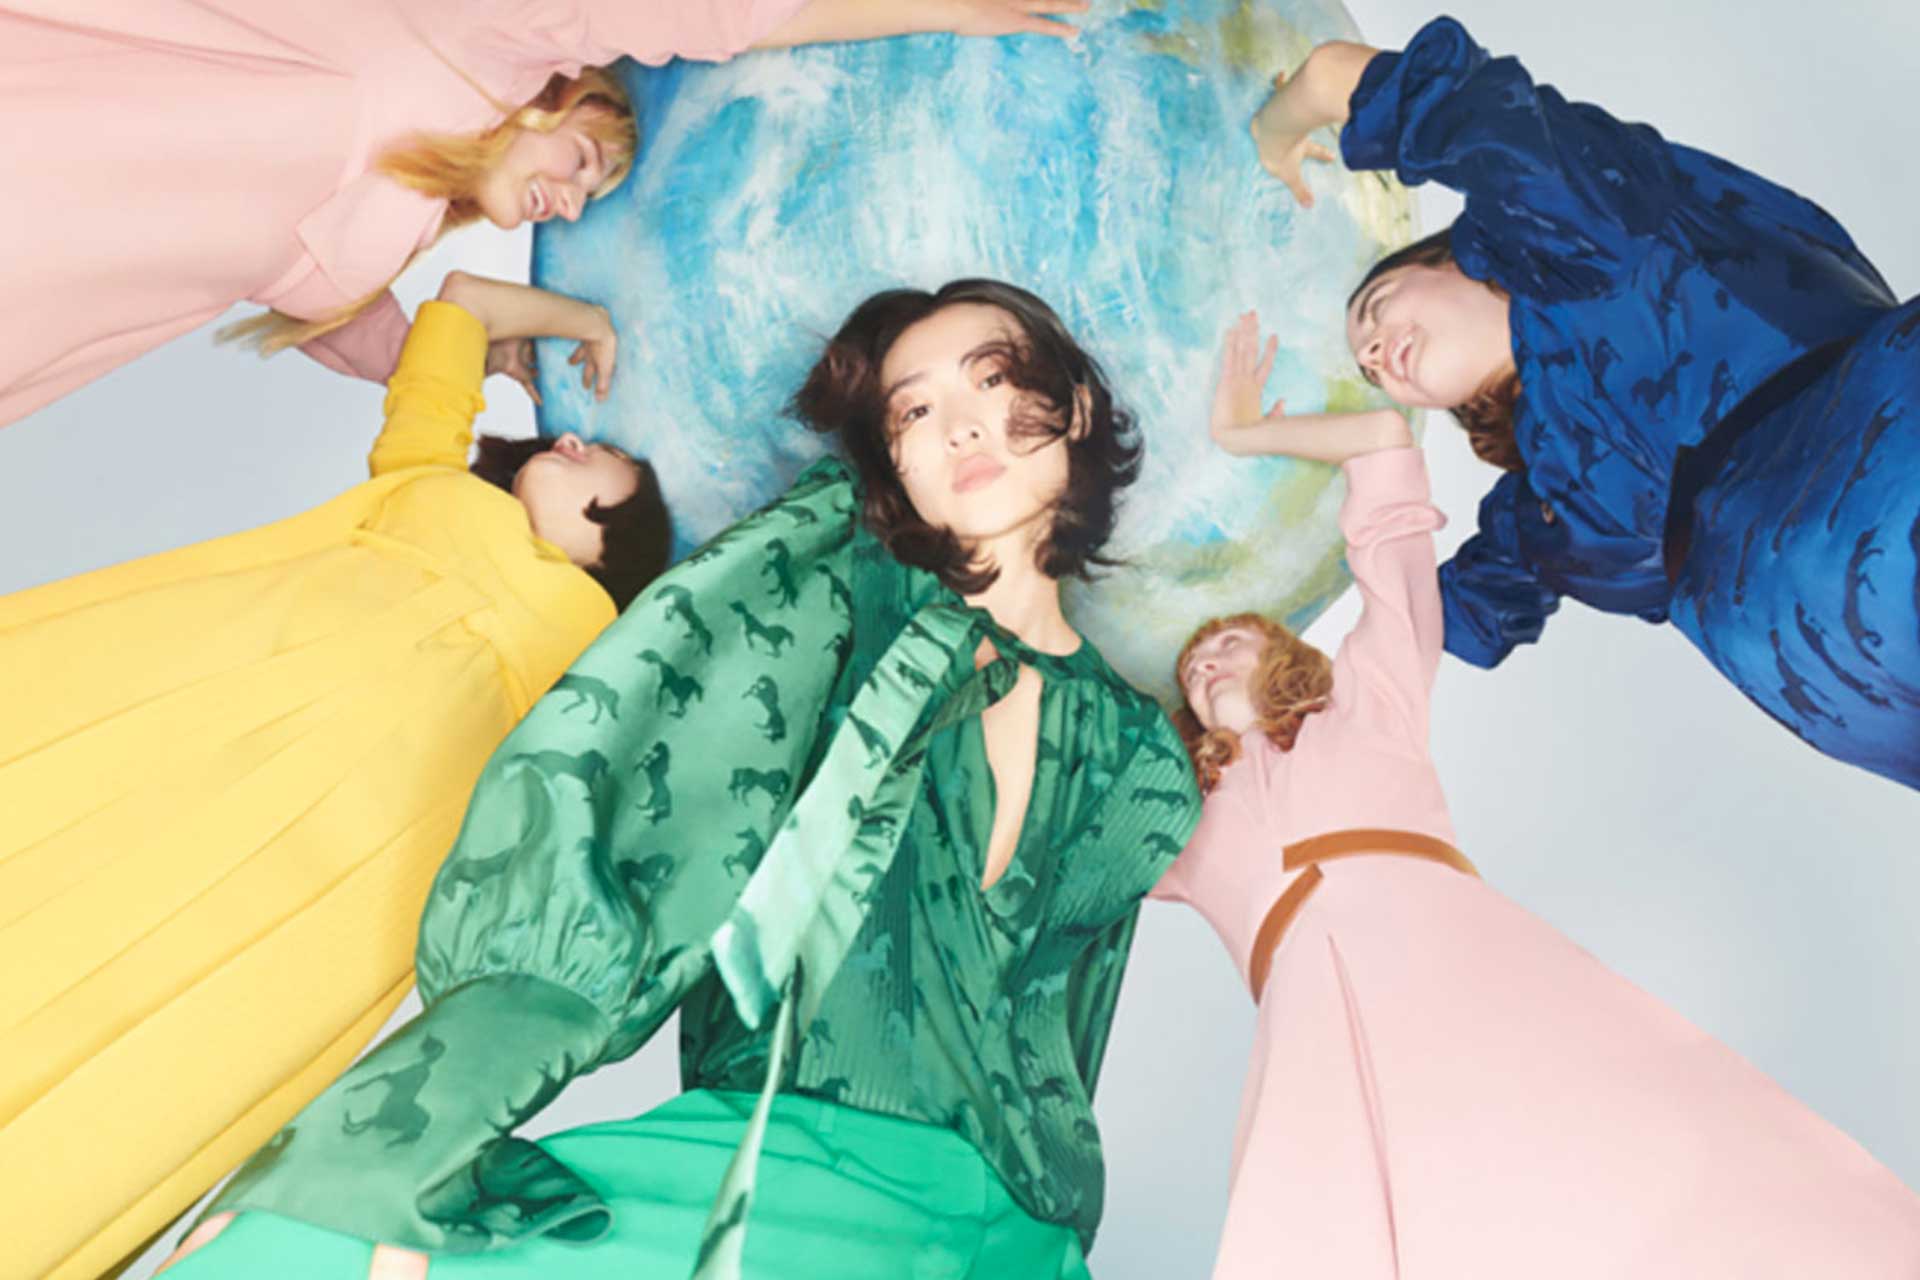 The Stella Mccartney Winter ’19 Campaign Featuring Members Of Extinction Rebellion